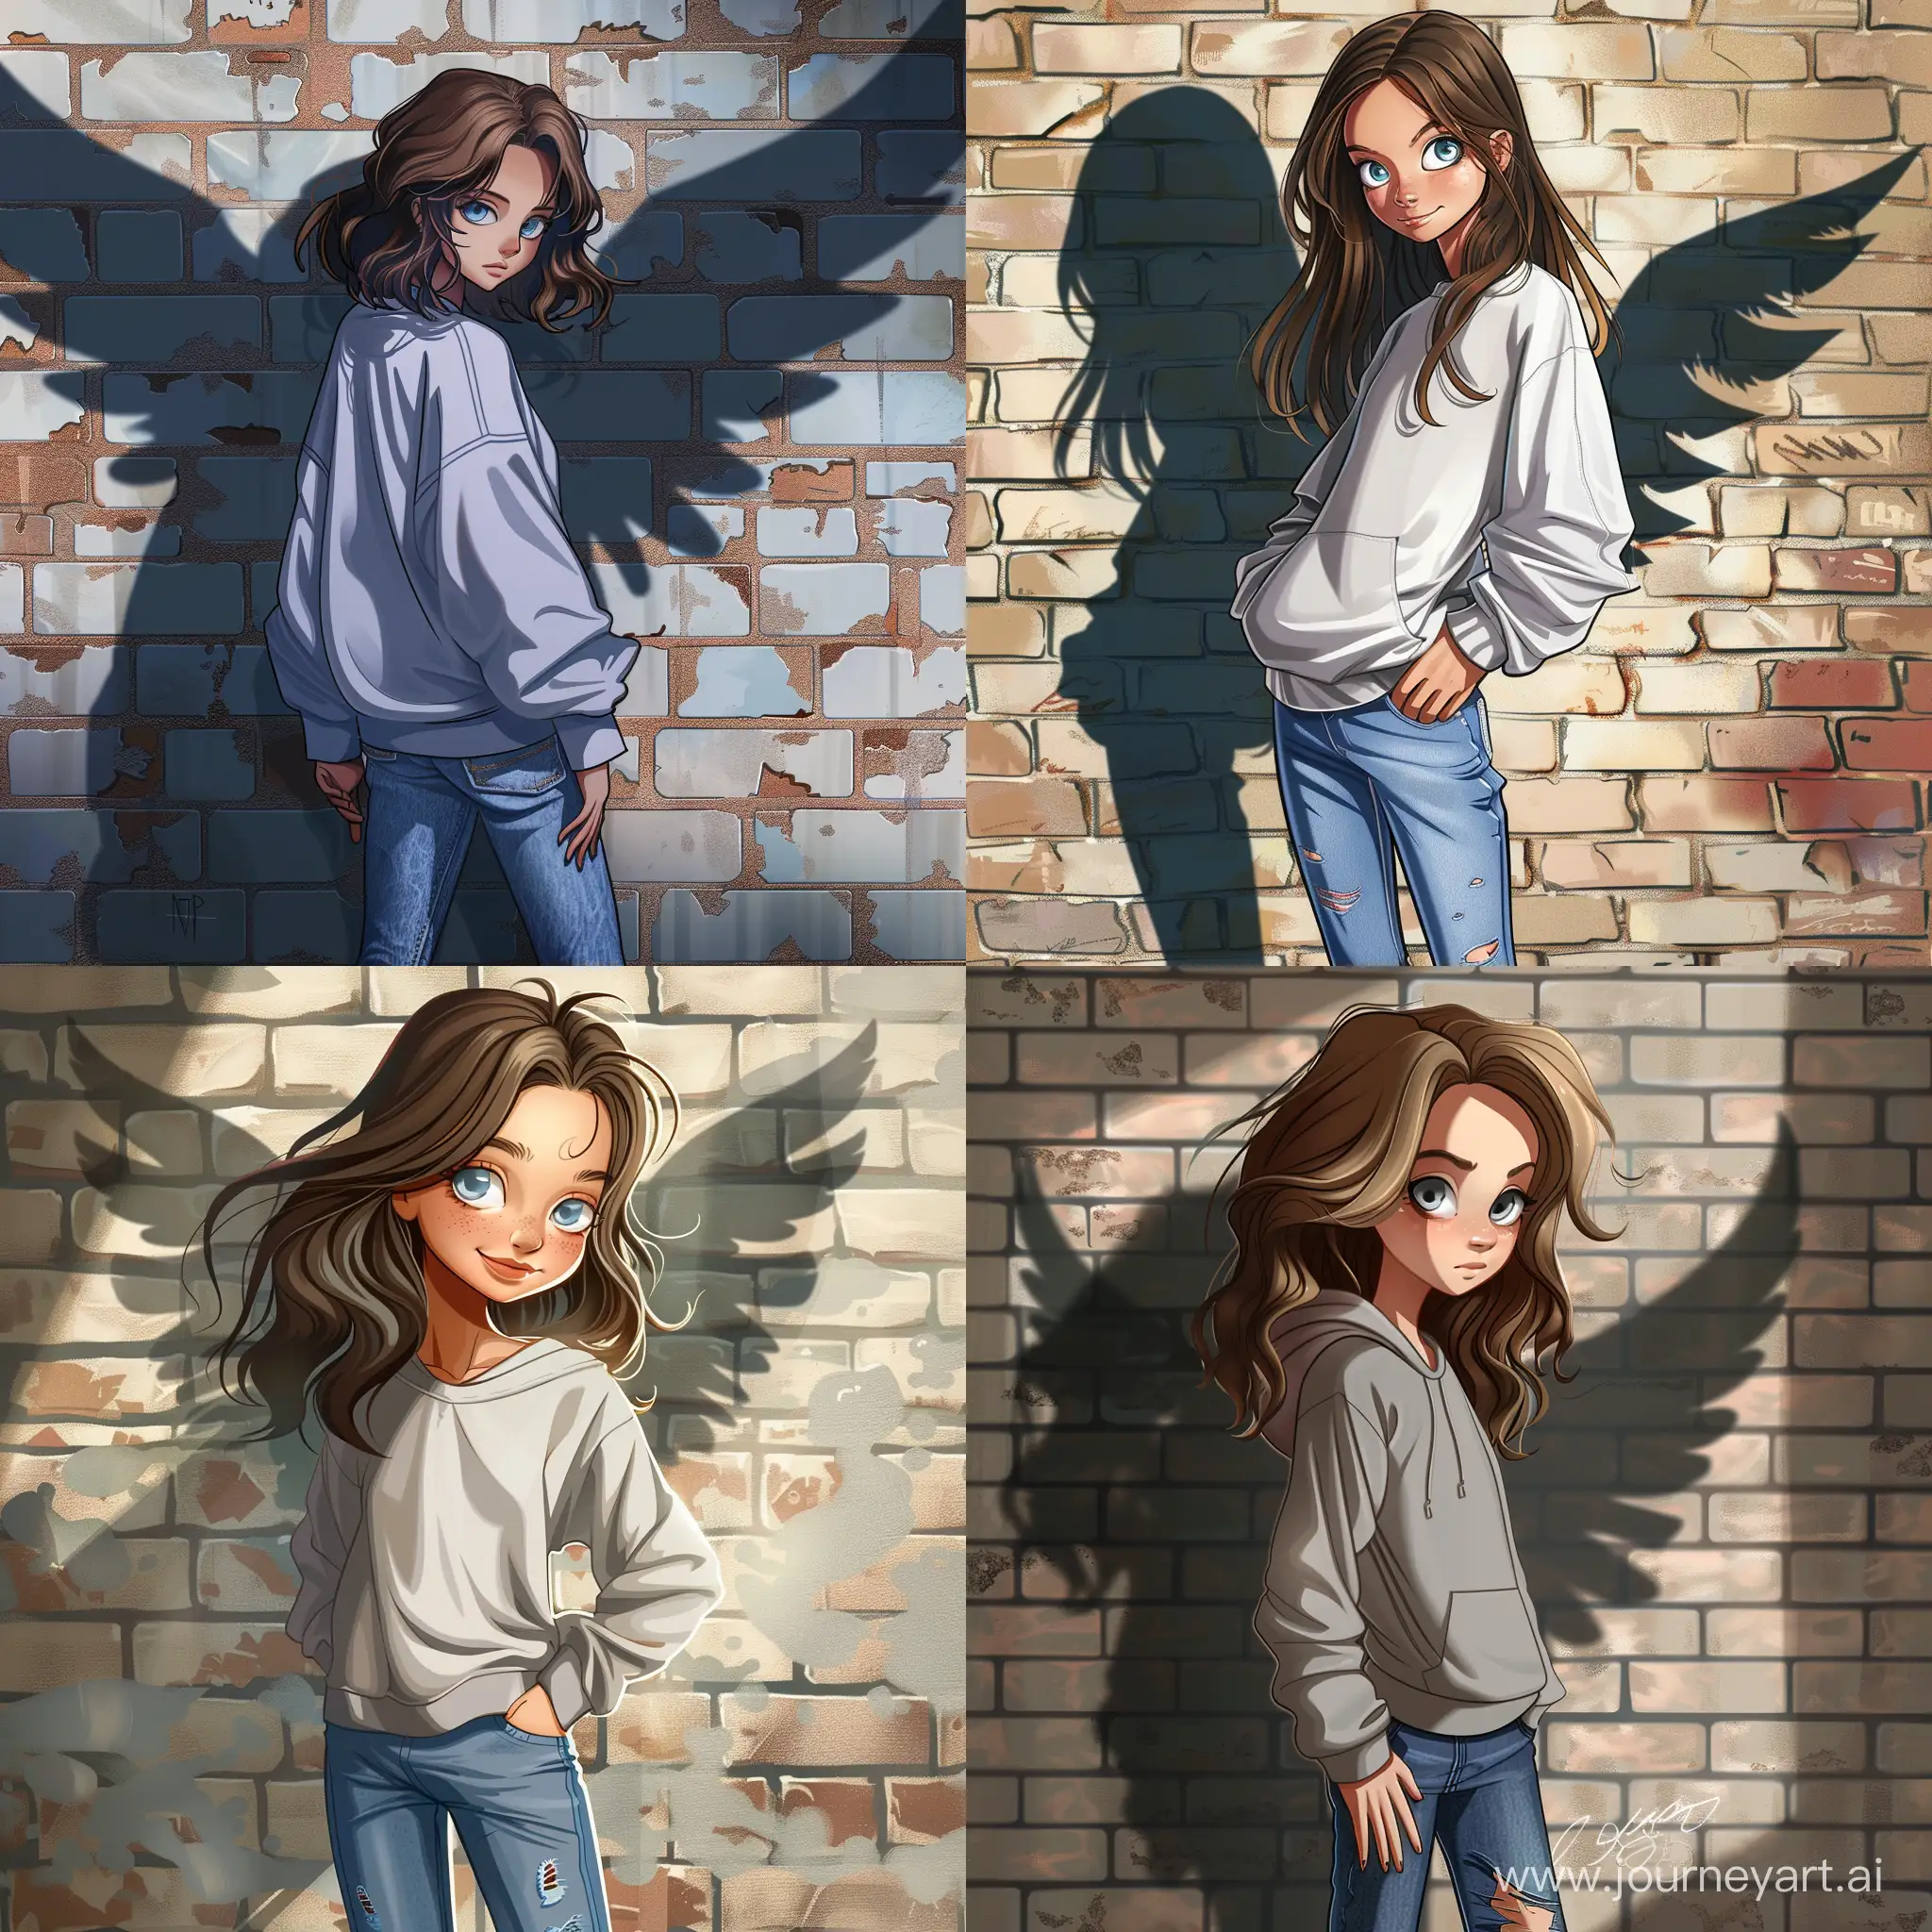 Beautiful girl, brown hair, gray-blue eyes, white skin, teenager, 15 years old, jeans and oversize sweatshirt, shadow of wings on the brick wall behind, high quality, high detail, cartoon art